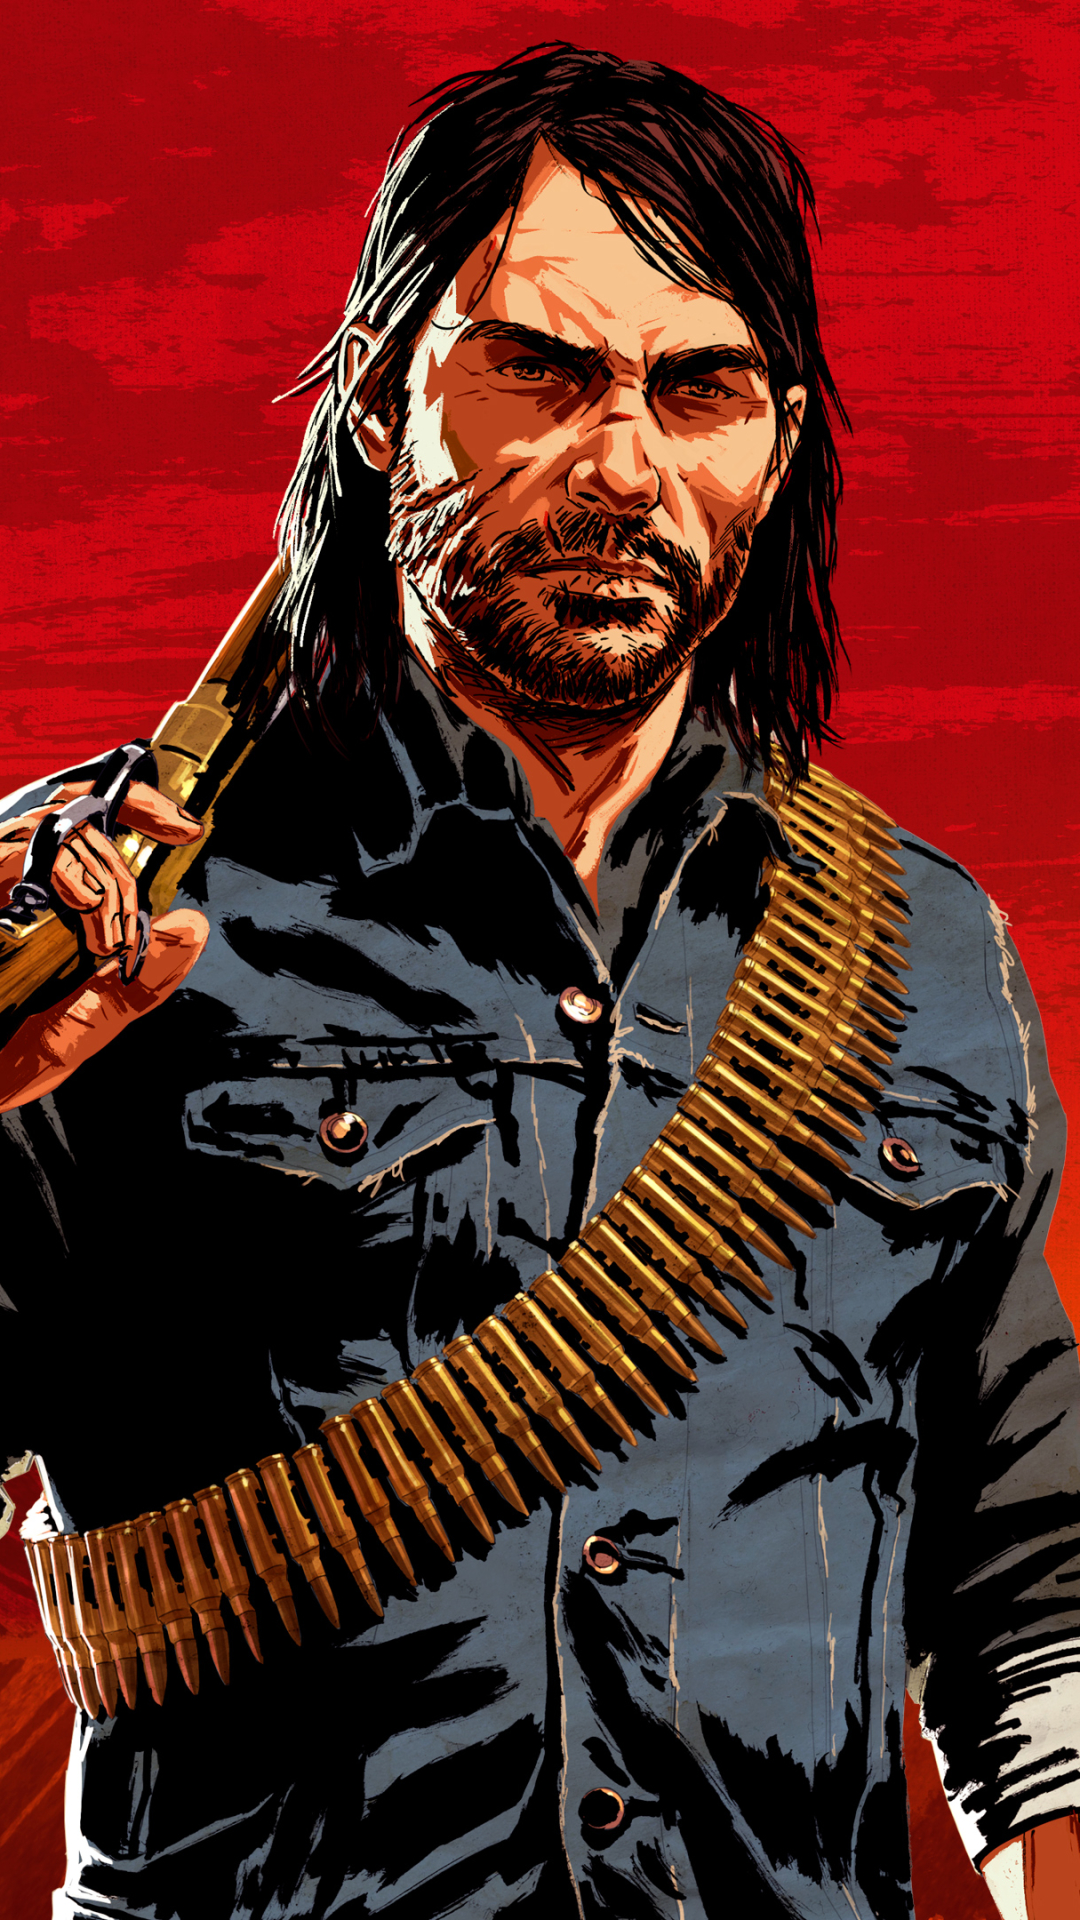 john marston, video game, red dead redemption 2, red dead